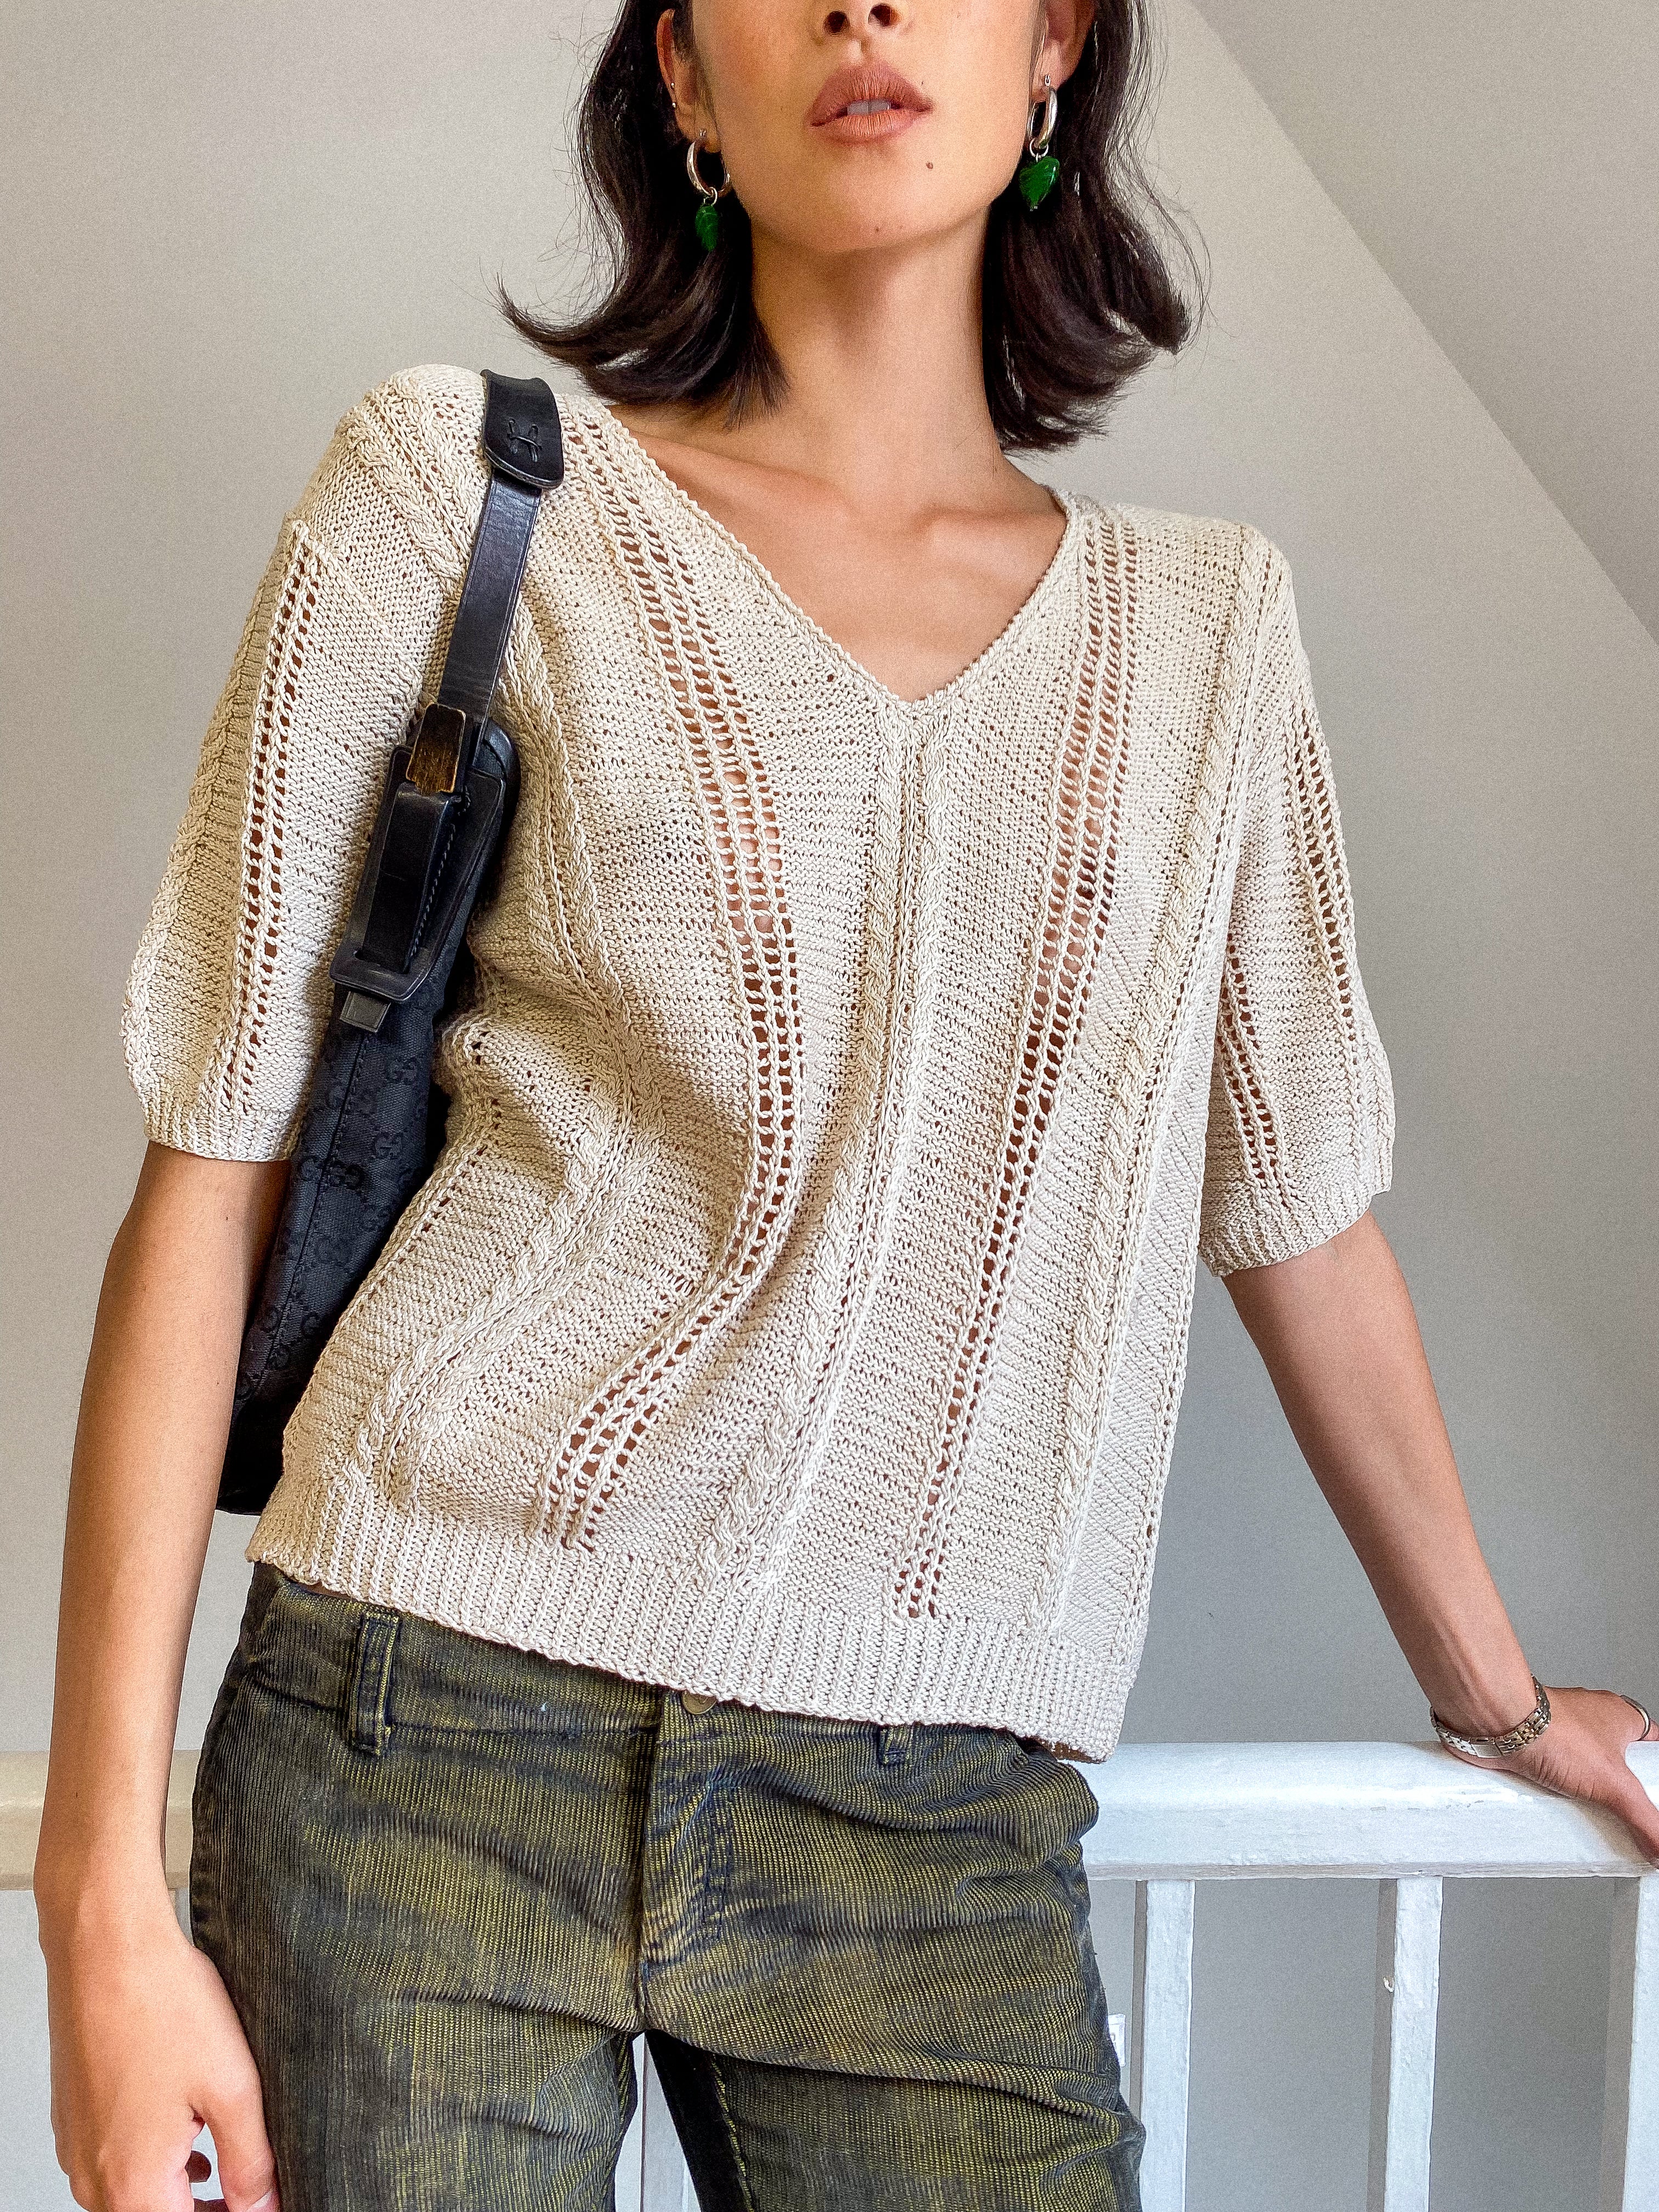 Buttermilk 2000s knit top with short sleeves, see through and v neckline.